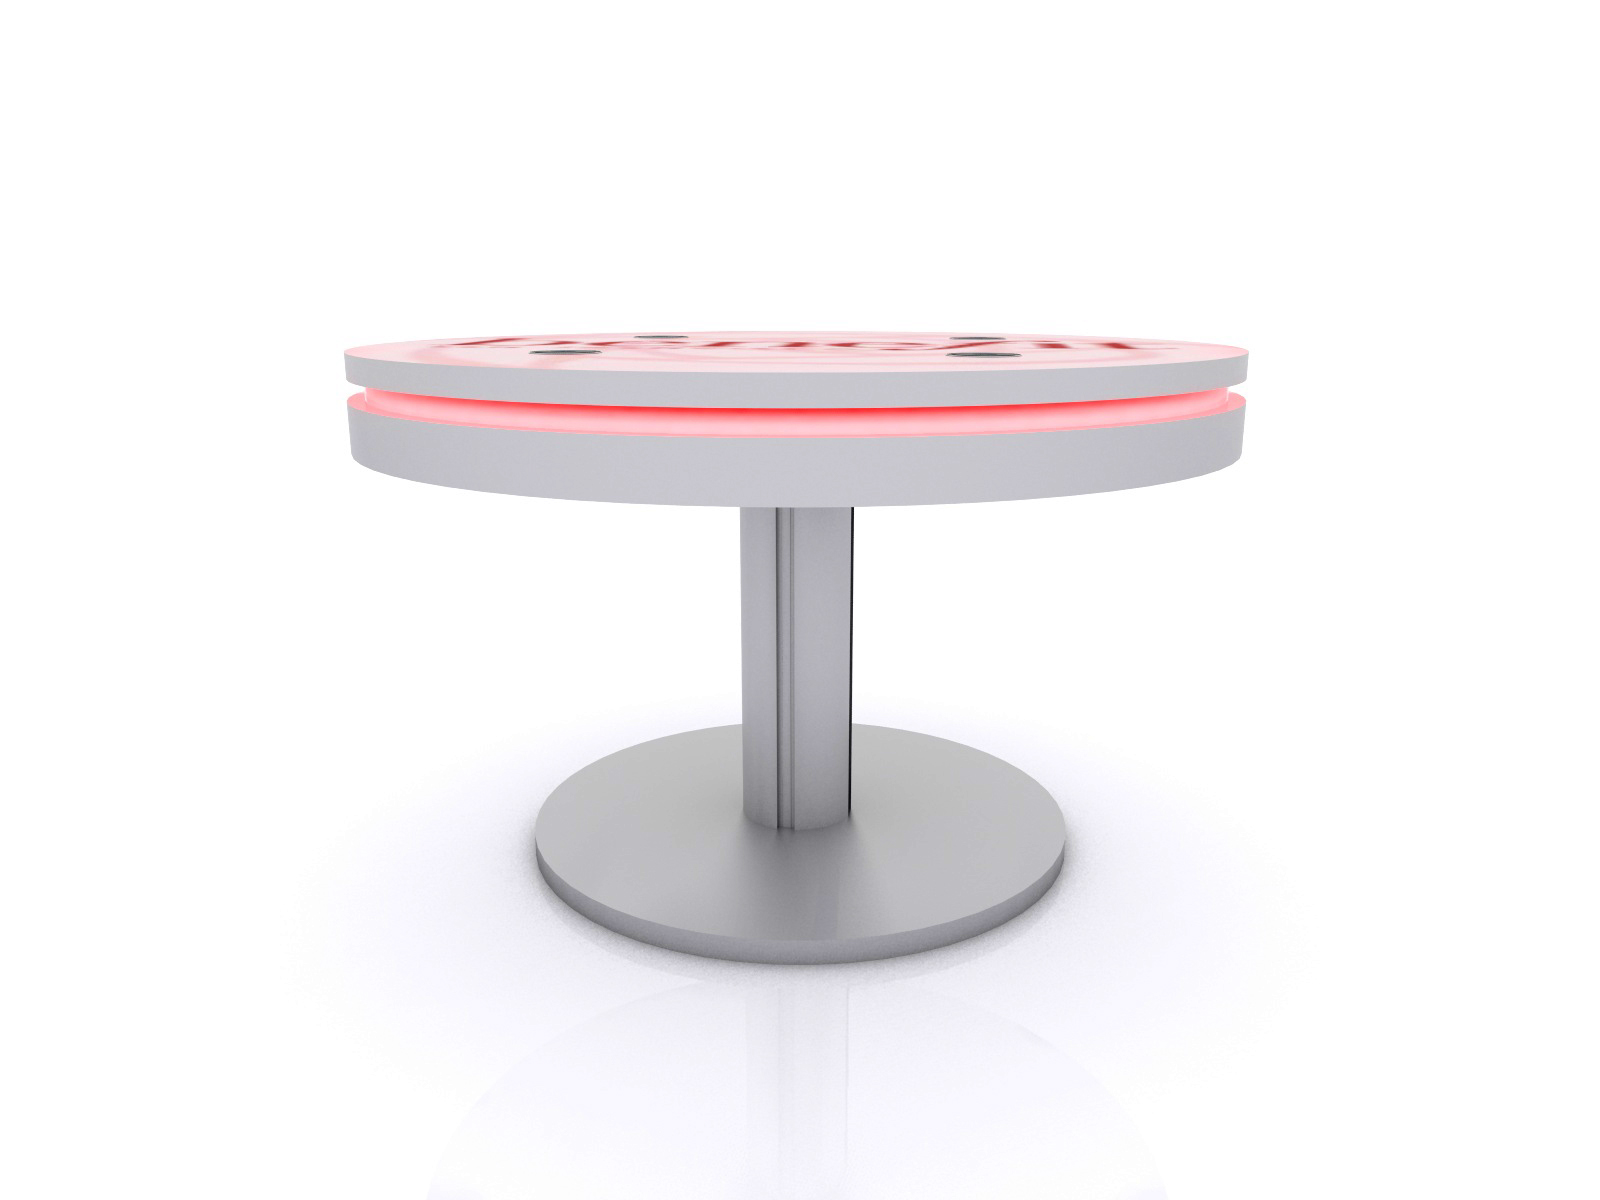 MOD-1452 Trade Show Wireless Charging Station -- Image 2